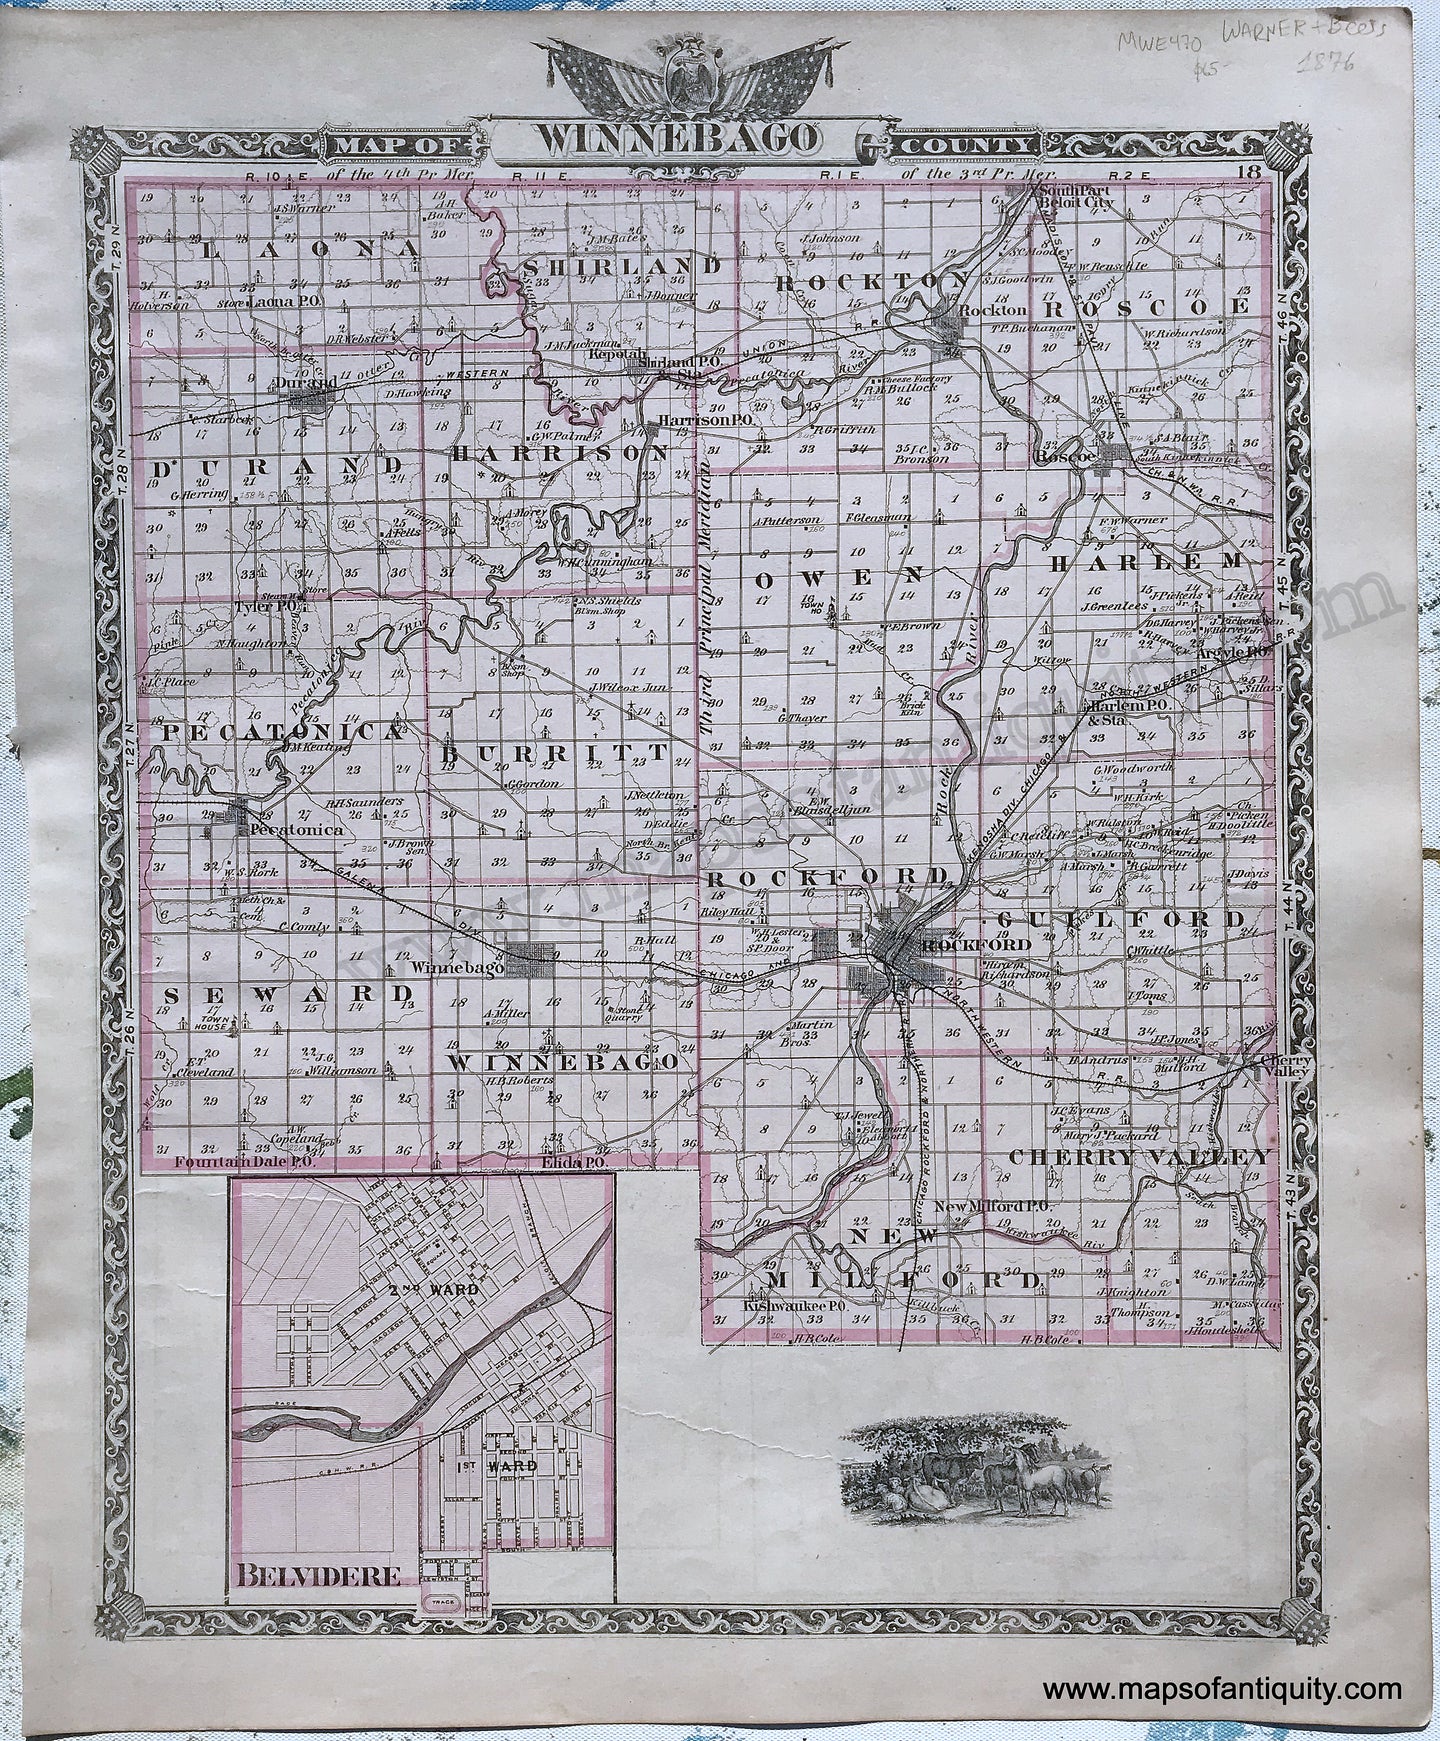 Antique-Hand-Colored-Map-Winnebago-County;-verso:-Stephenson-County-Illinois-1876-Warner-&-Beers-/-Union-Atlas-Co.-Midwest-1800s-19th-century-Maps-of-Antiquity